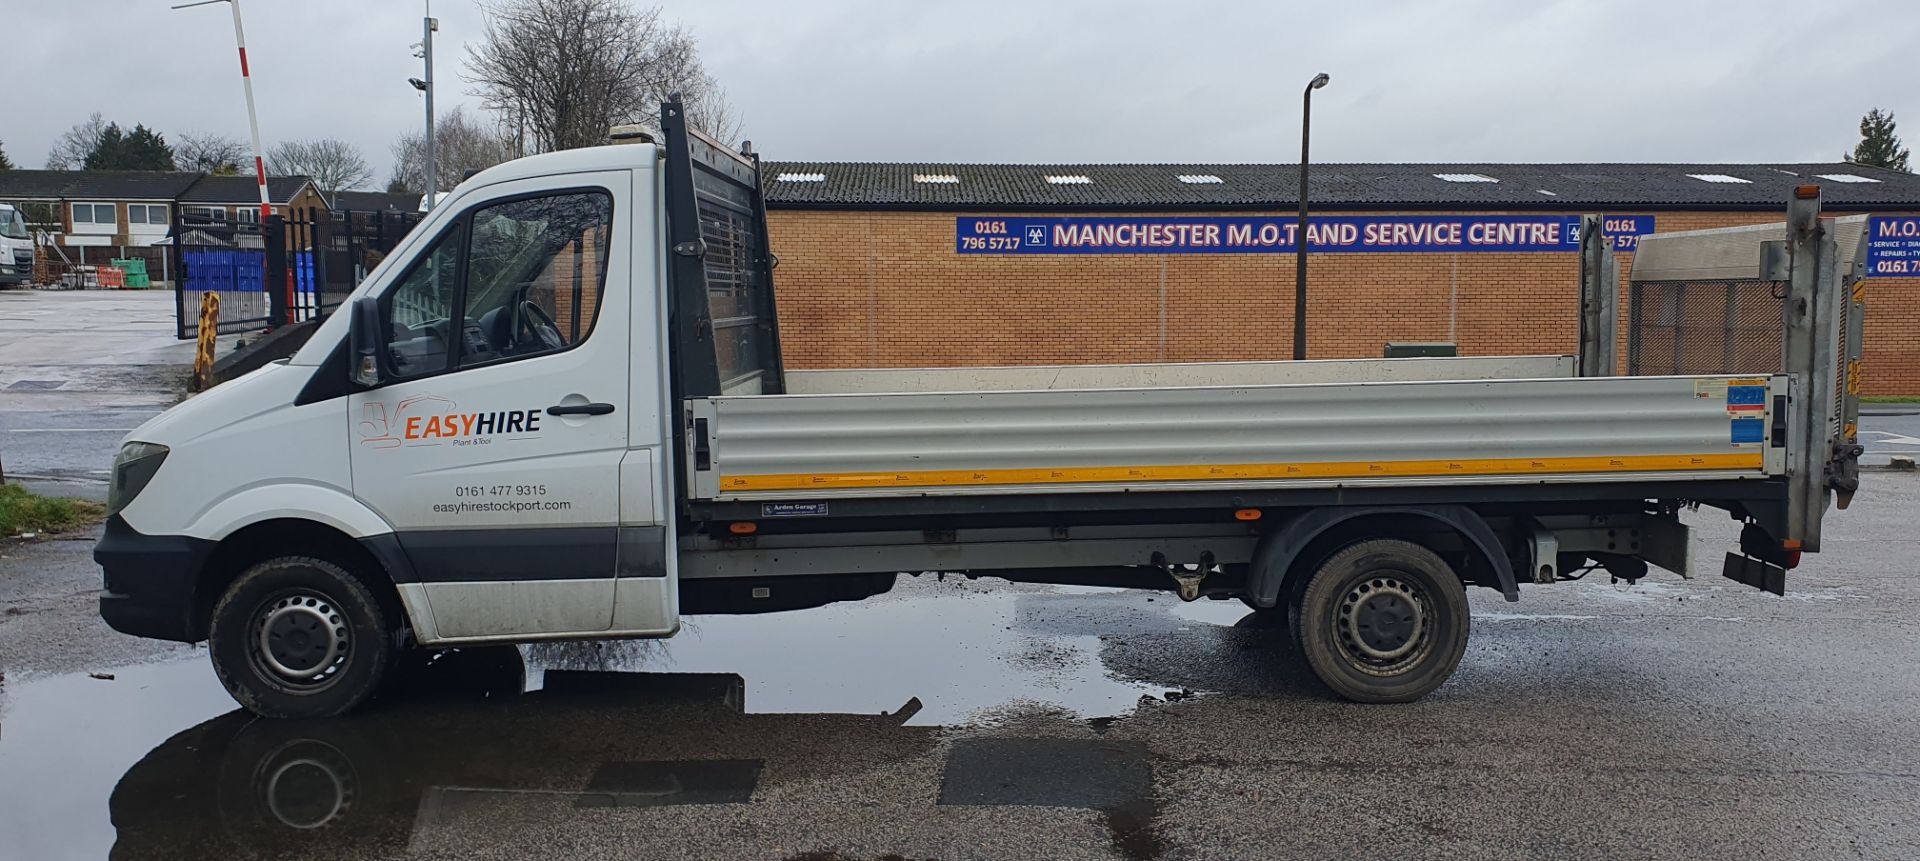 Mercedes-Benz Sprinter 314CDI Dropside Lorry w/ Tail-Lift | DIG 4985 | 102,887 Miles - Image 4 of 19